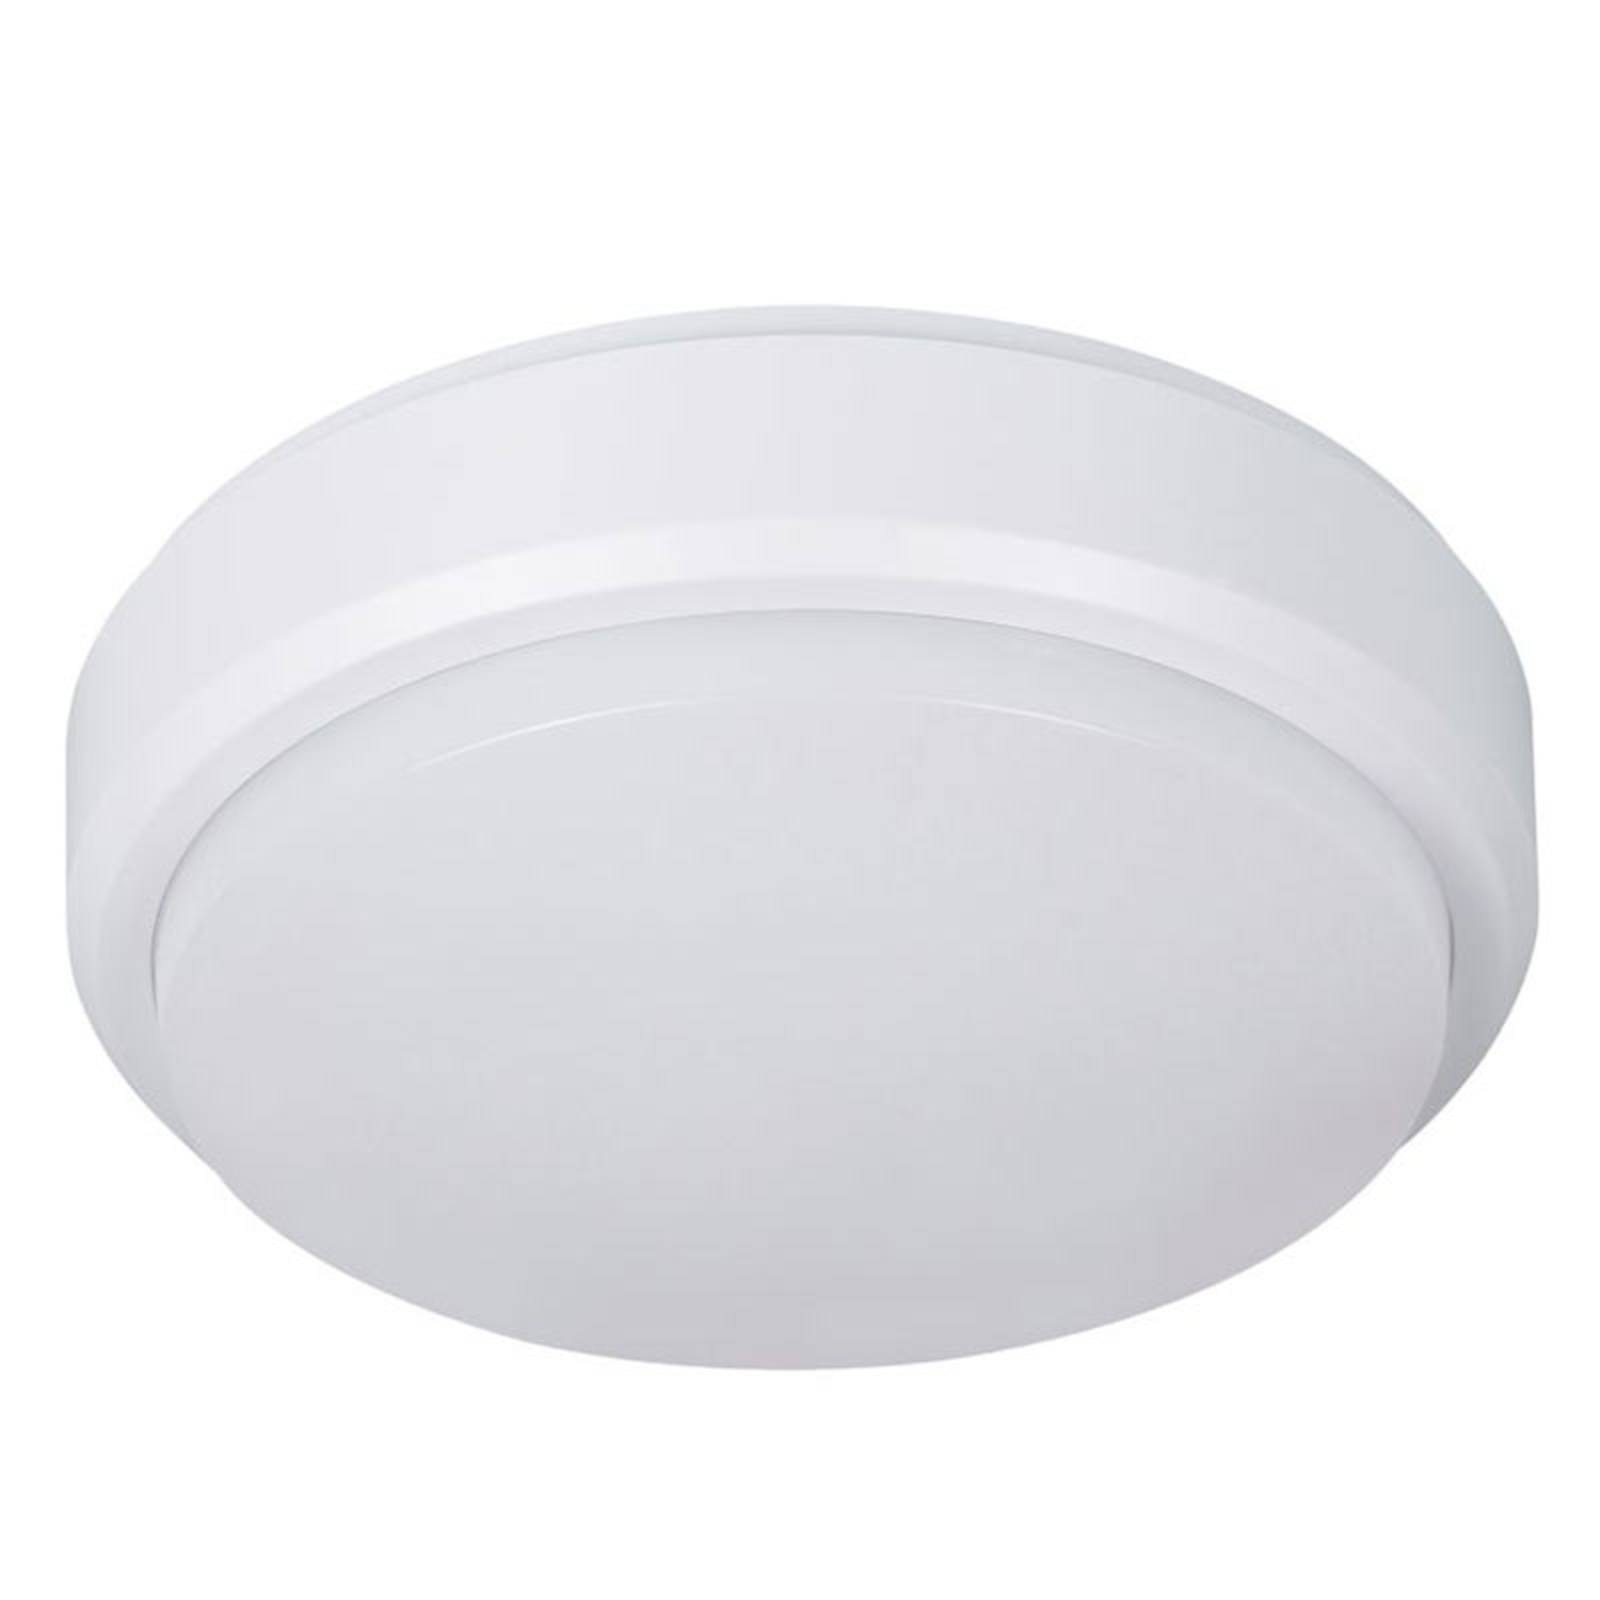 müller-licht plafonnier led pictor, rond, protection ip54